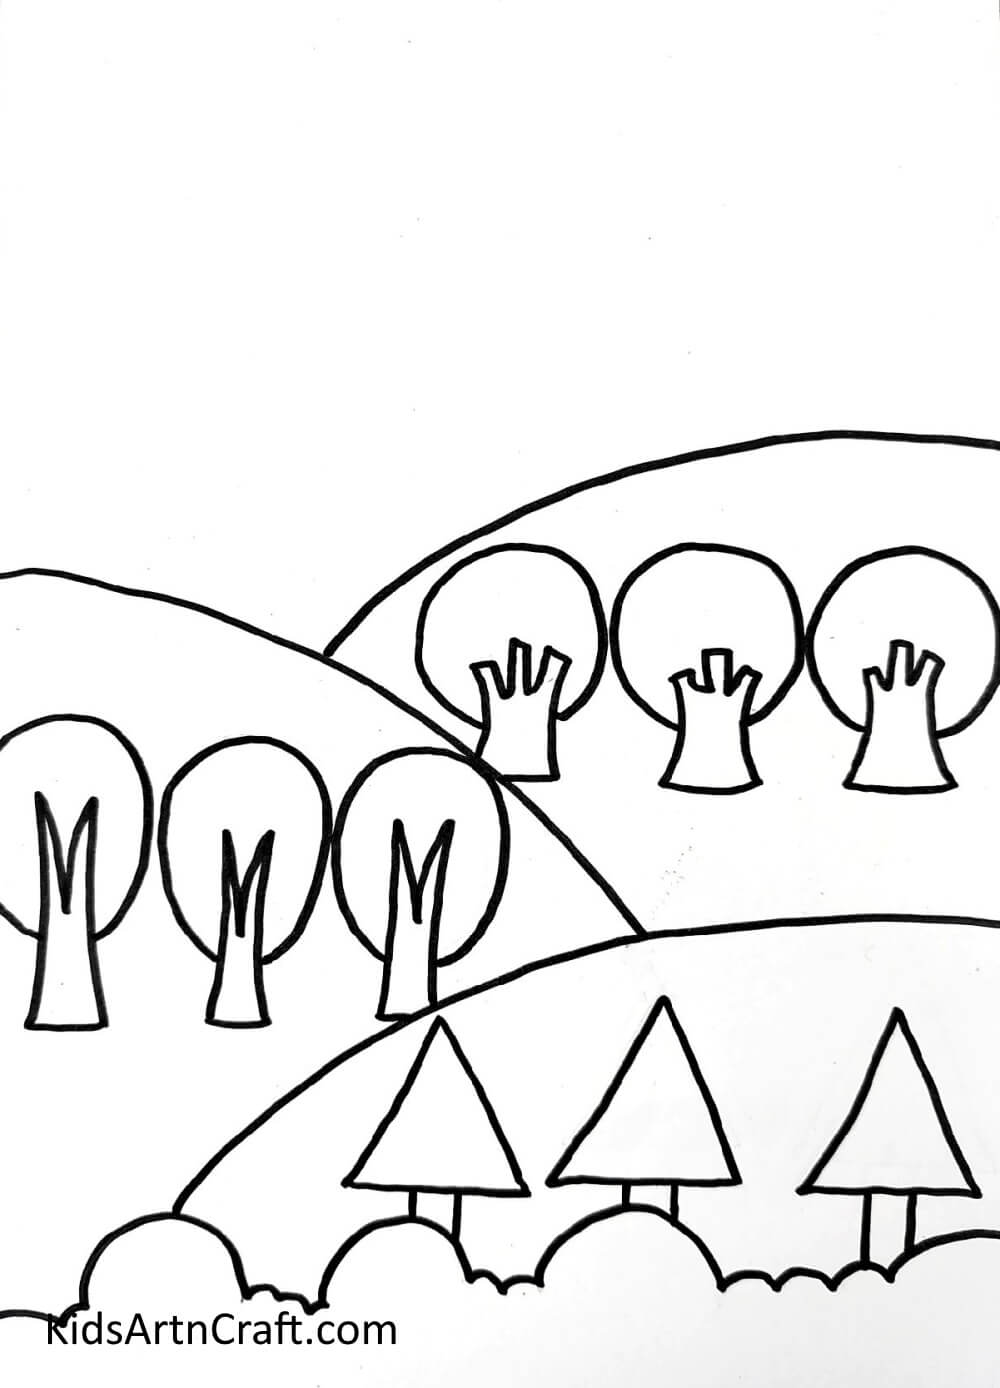 Drawing The Trees - A Guide to Drawing a Scenery Composition for Children